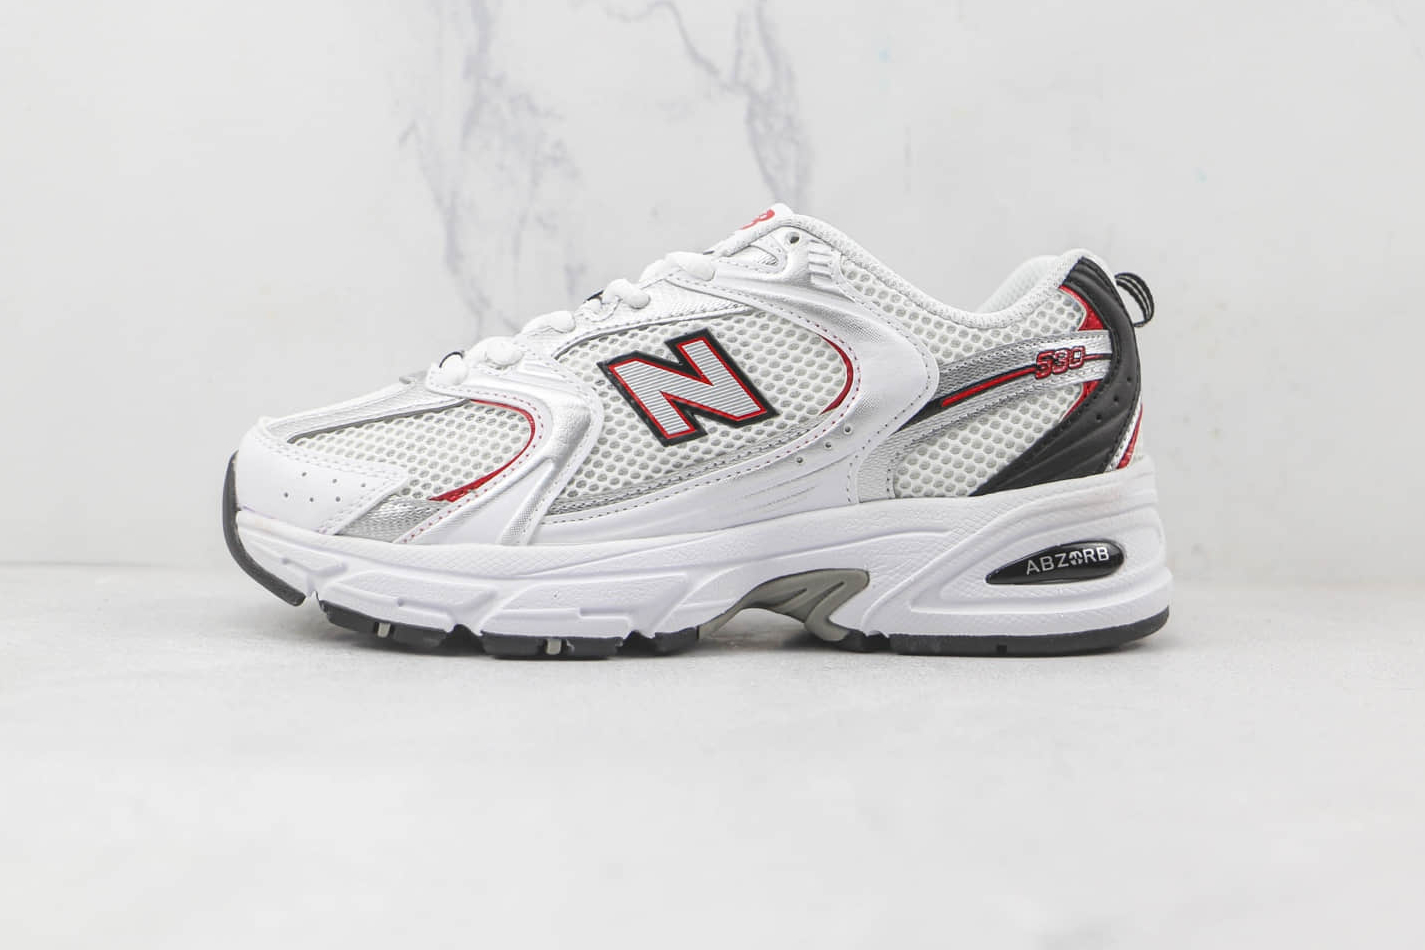 New Balance 530v2 Retro 'White Silver Red' MR530SA - Classic Style and Comfort